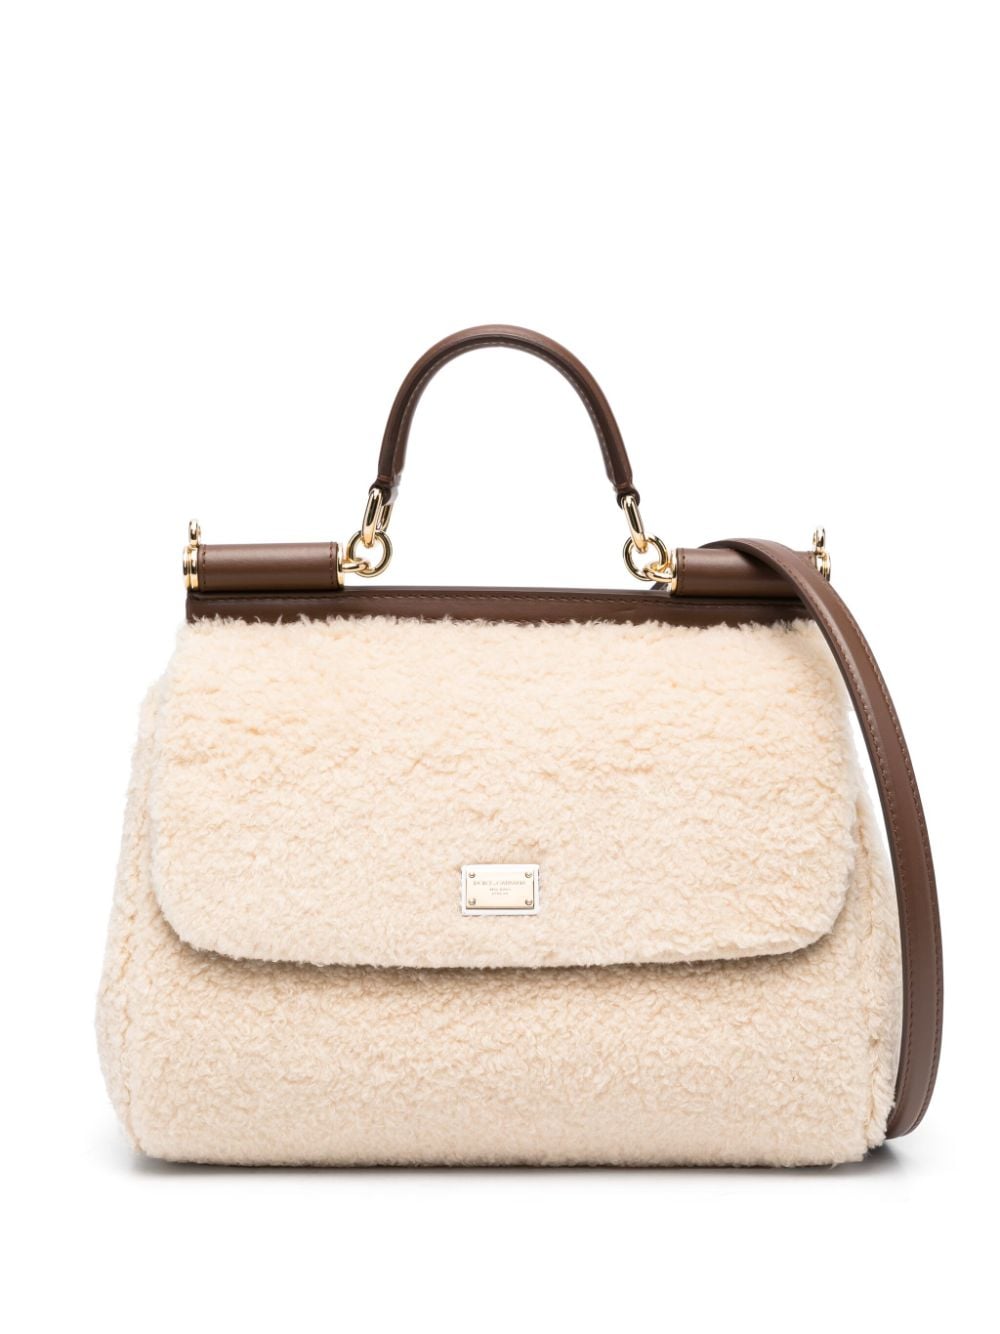 Ivory & Cedar Brown Faux-Shearling Tote Handbag with Gold-Tone Details